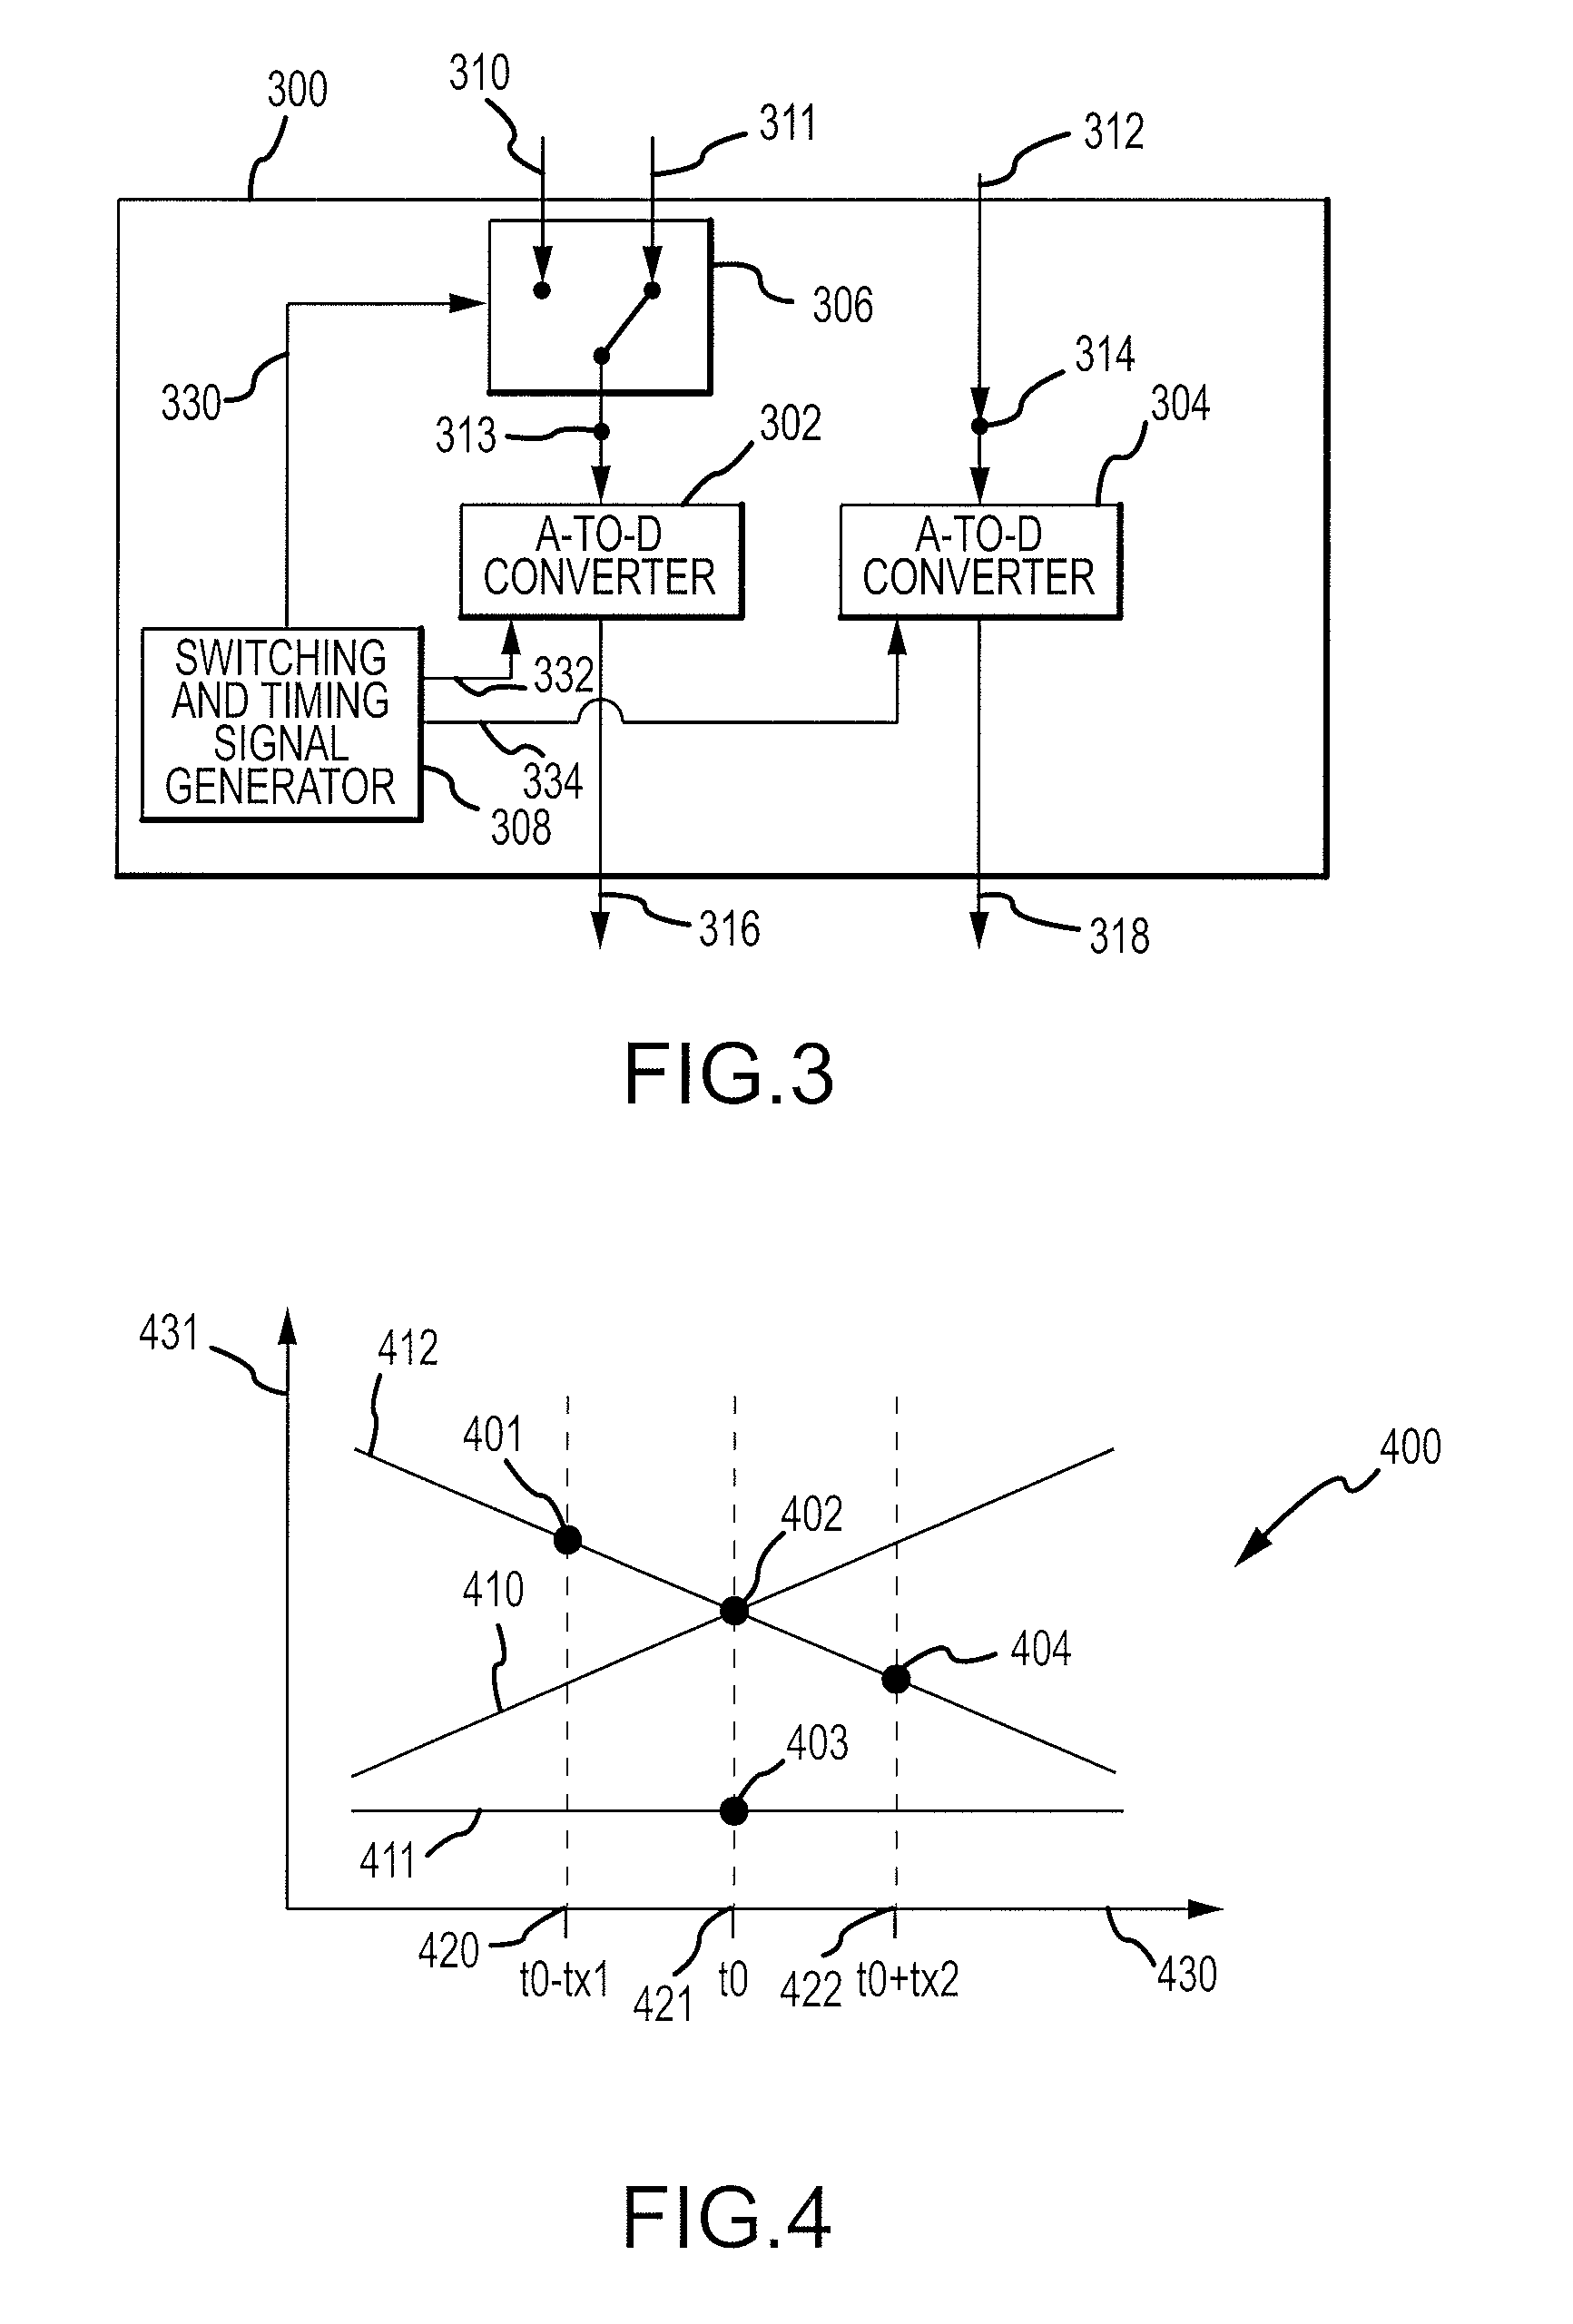 Phase current sampling and regulating apparatus and methods, and electric motor drive systems